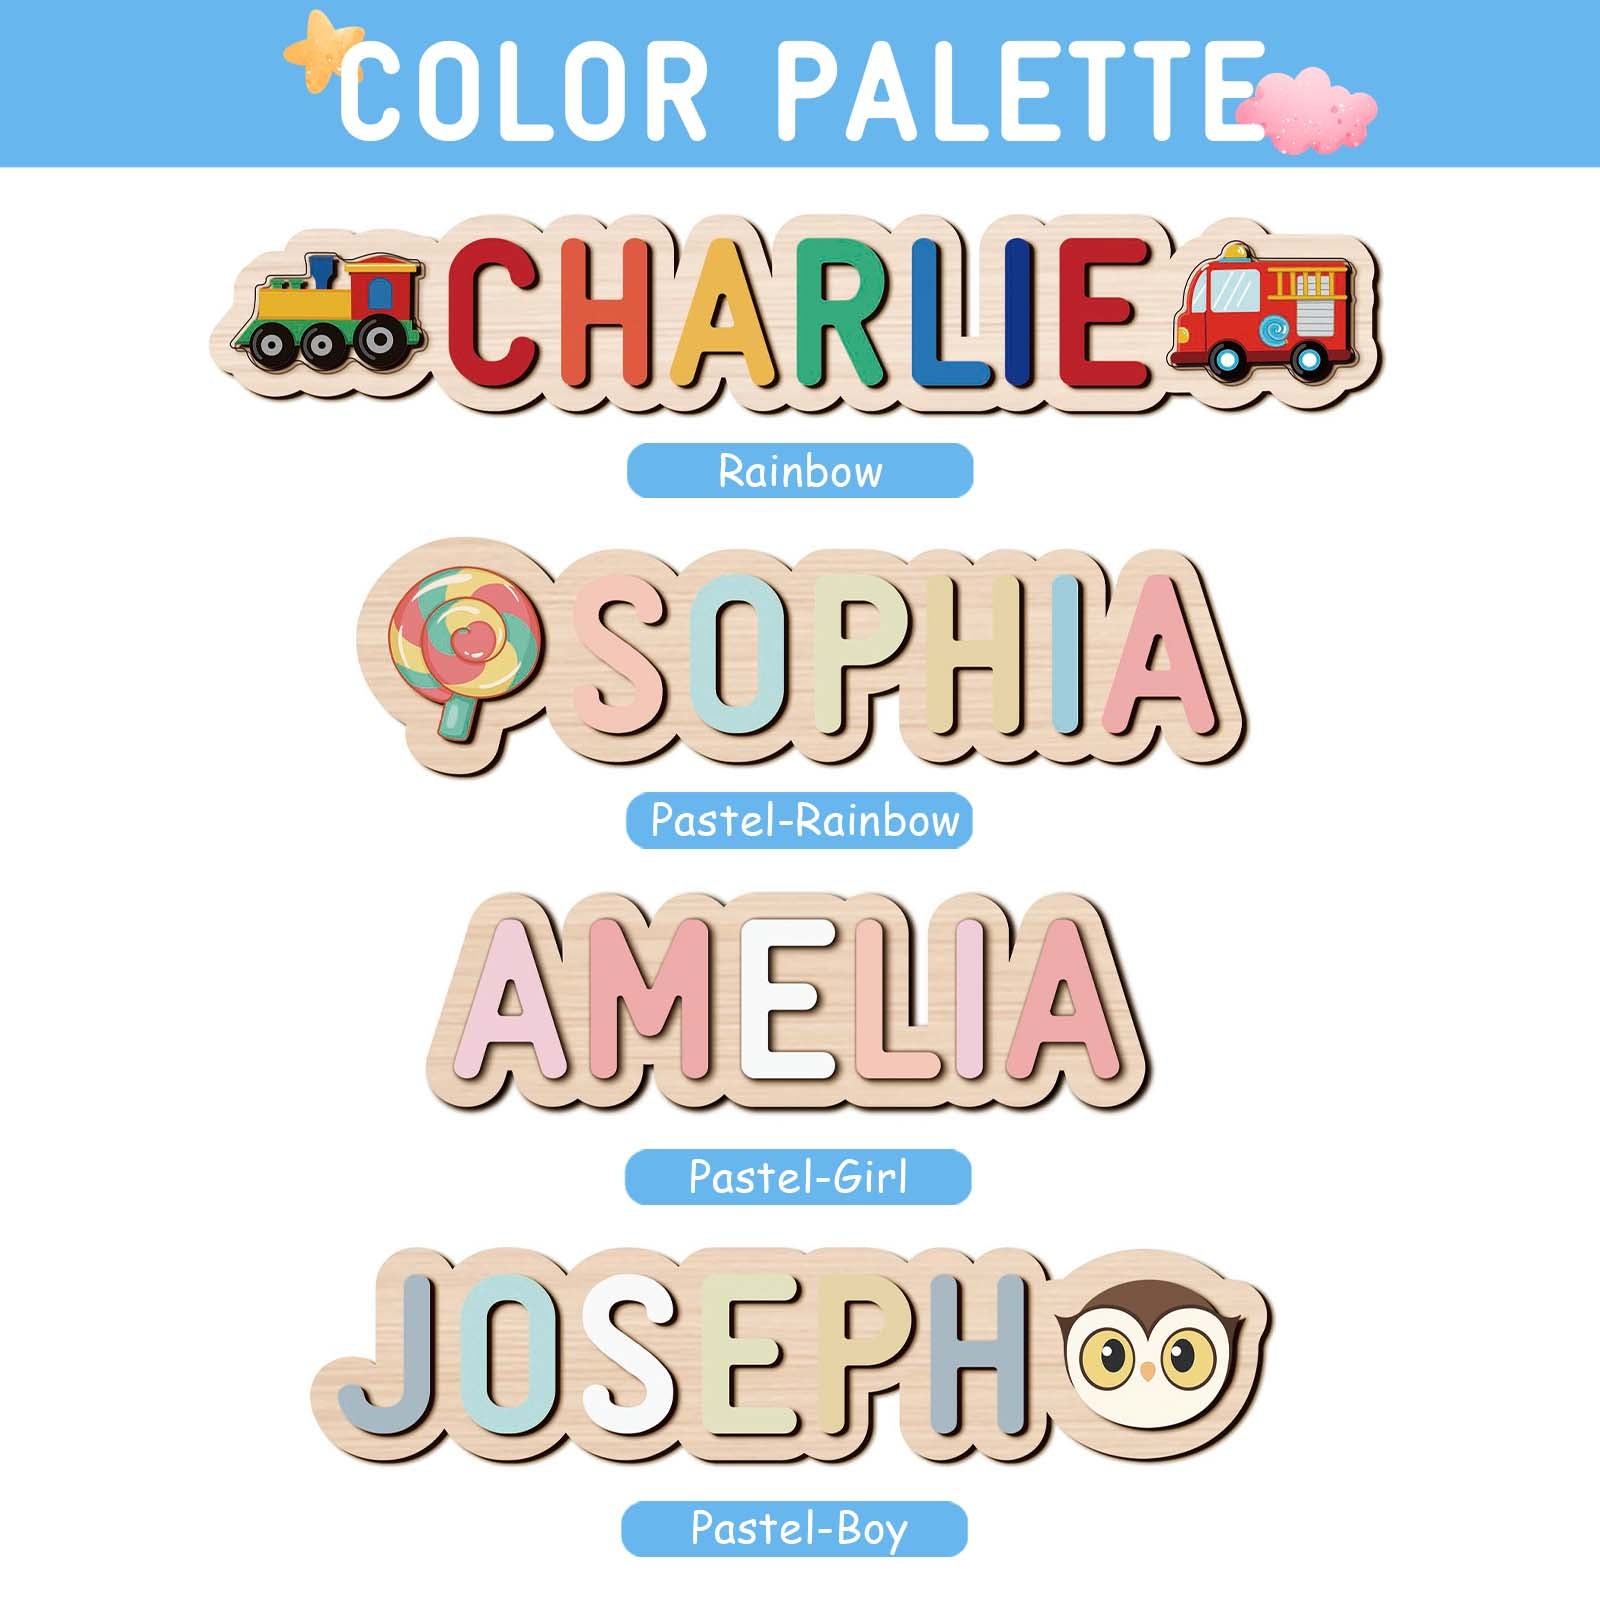 Personalised Wooden Baby Name Puzzle - Outlines